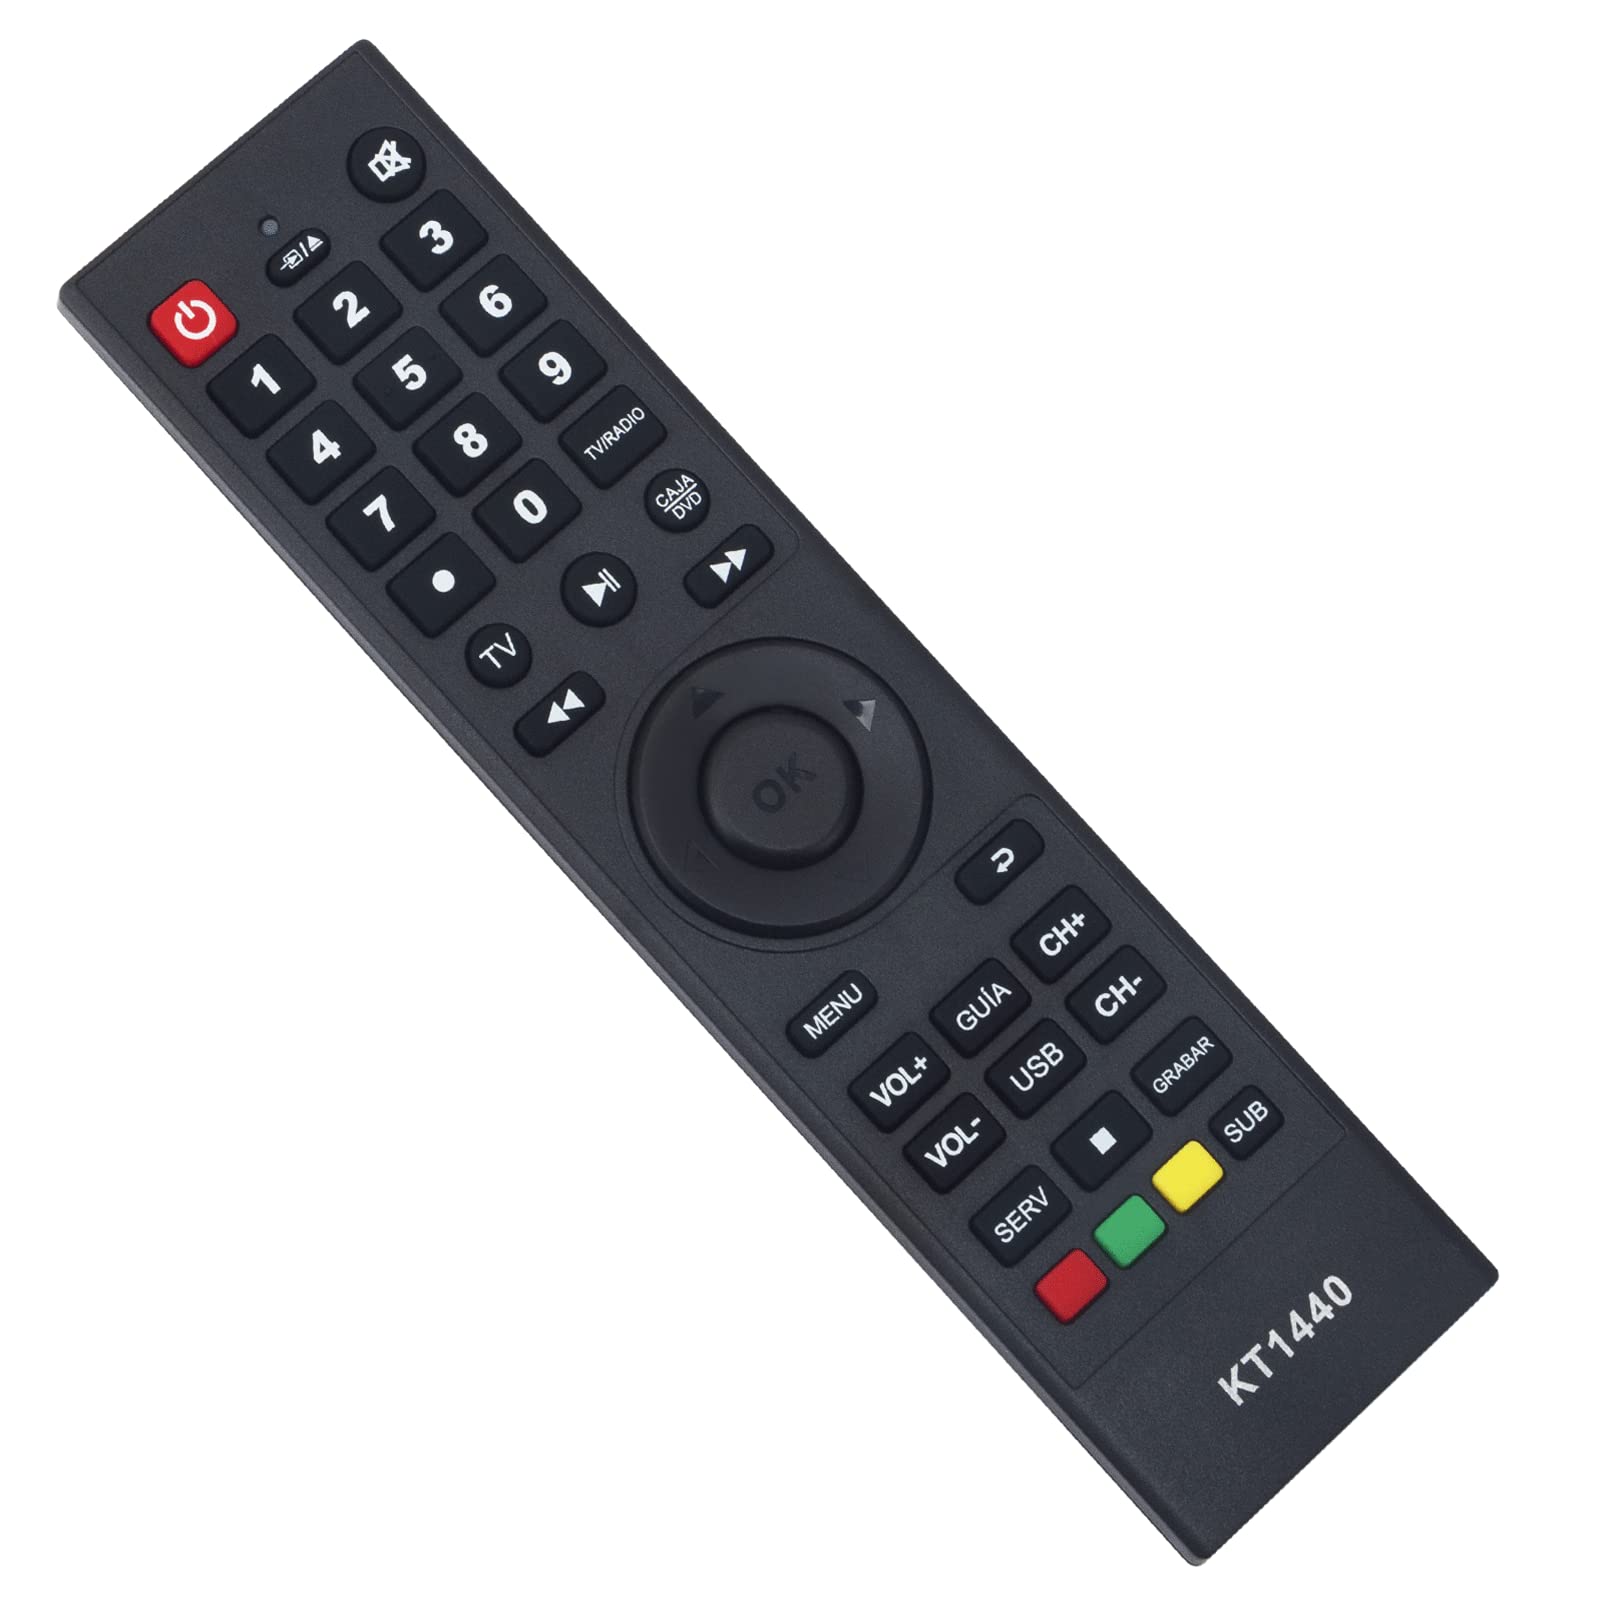 Allimity KT1440 Replaced Remote Control Fit for Haier TV,fit for Panda TV, fit for ATEC TV,fit for DTV TV,fit for Gelec TV,fit for Soyea TV,fit for CRT Parker TV,fit for Wentai DVD